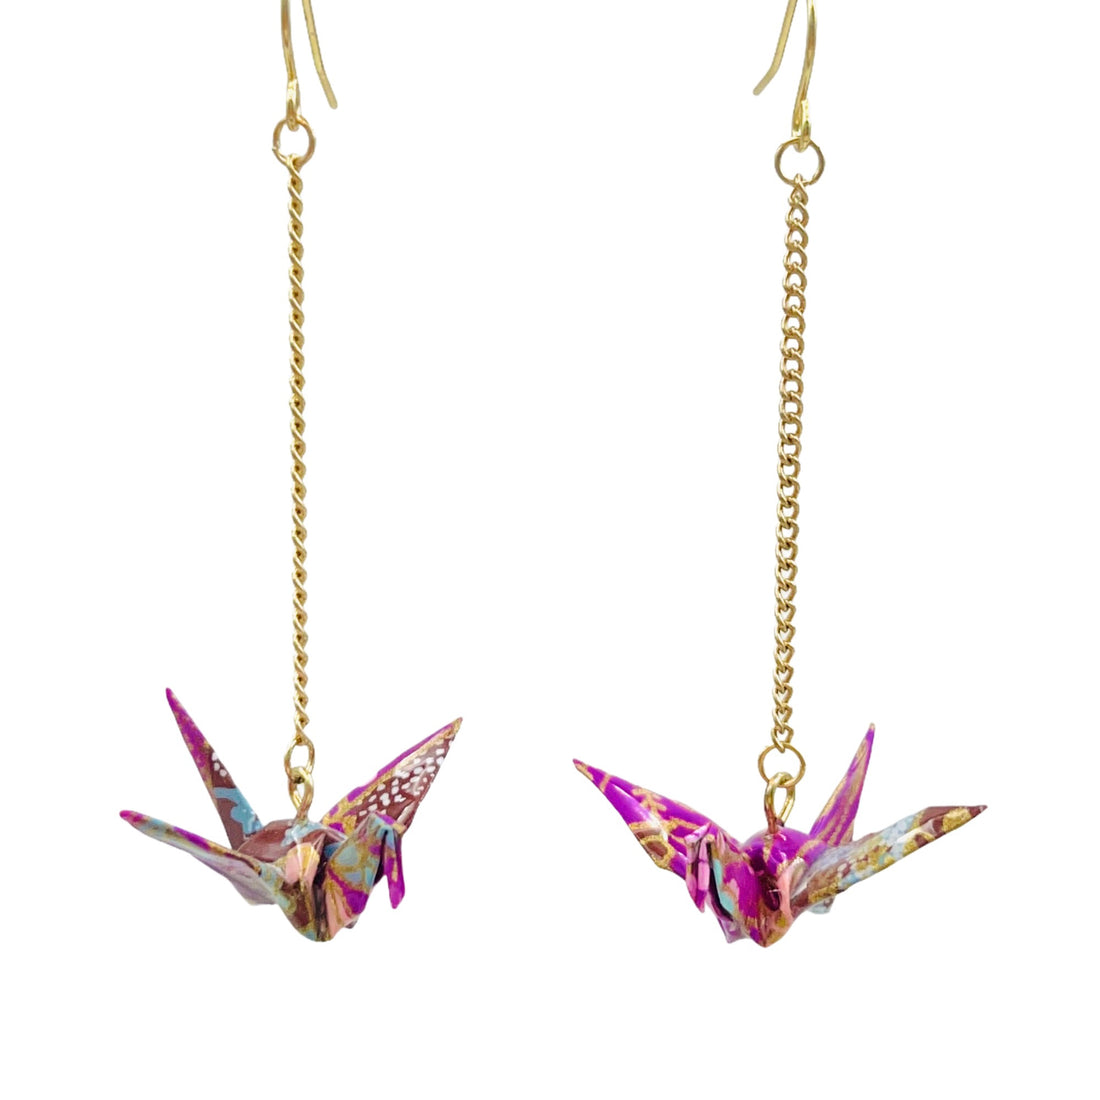 Handmade Origami with silver / gold chain drop earrings